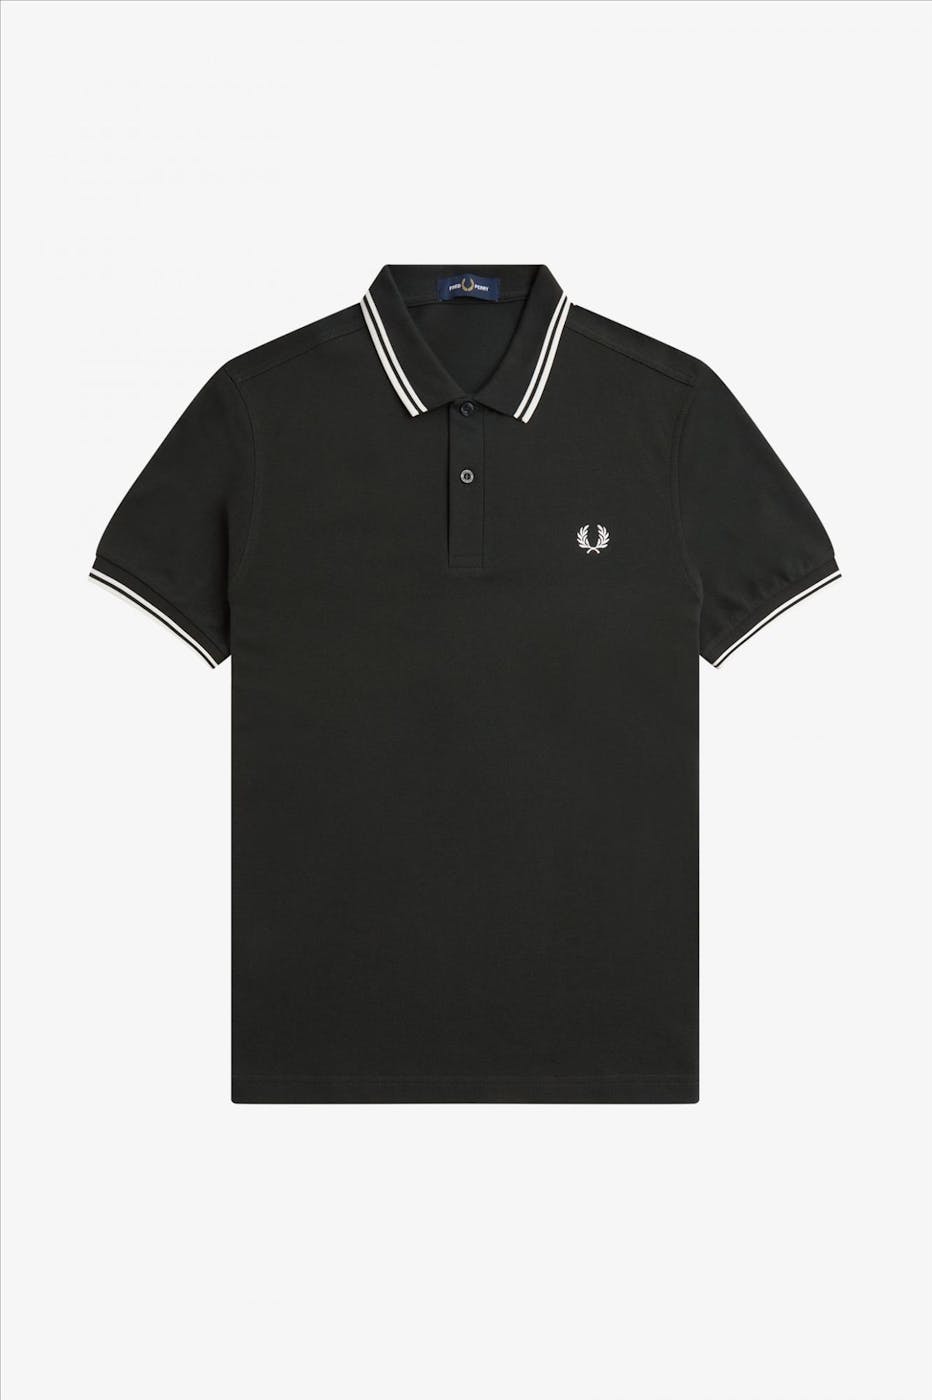 Fred Perry - Donkergroen-Witte Twin Tipped polo